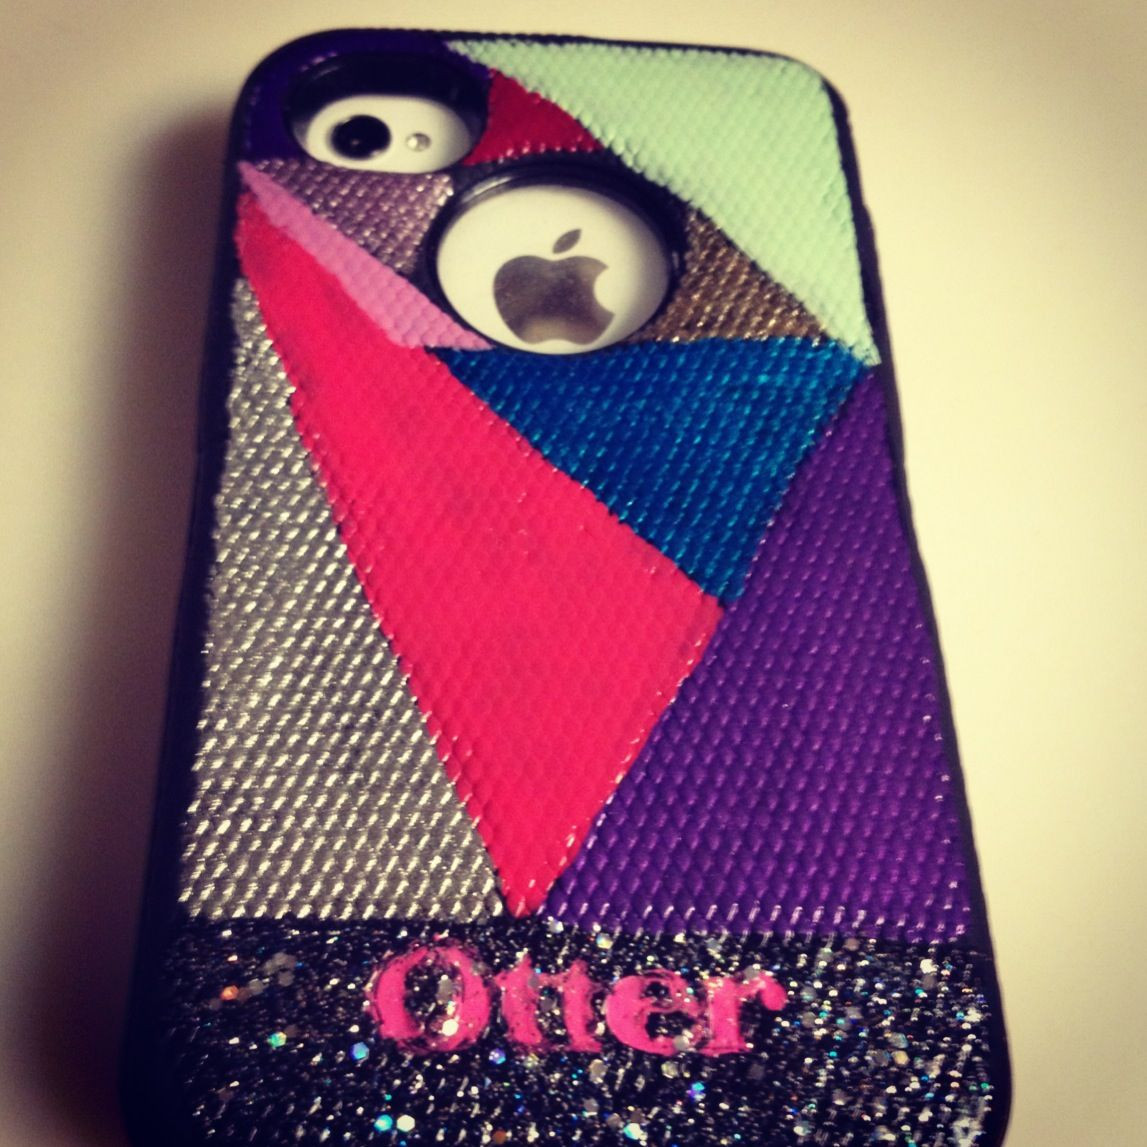 DIY Otterbox Decoration
 Otterbox case painted with nail polish